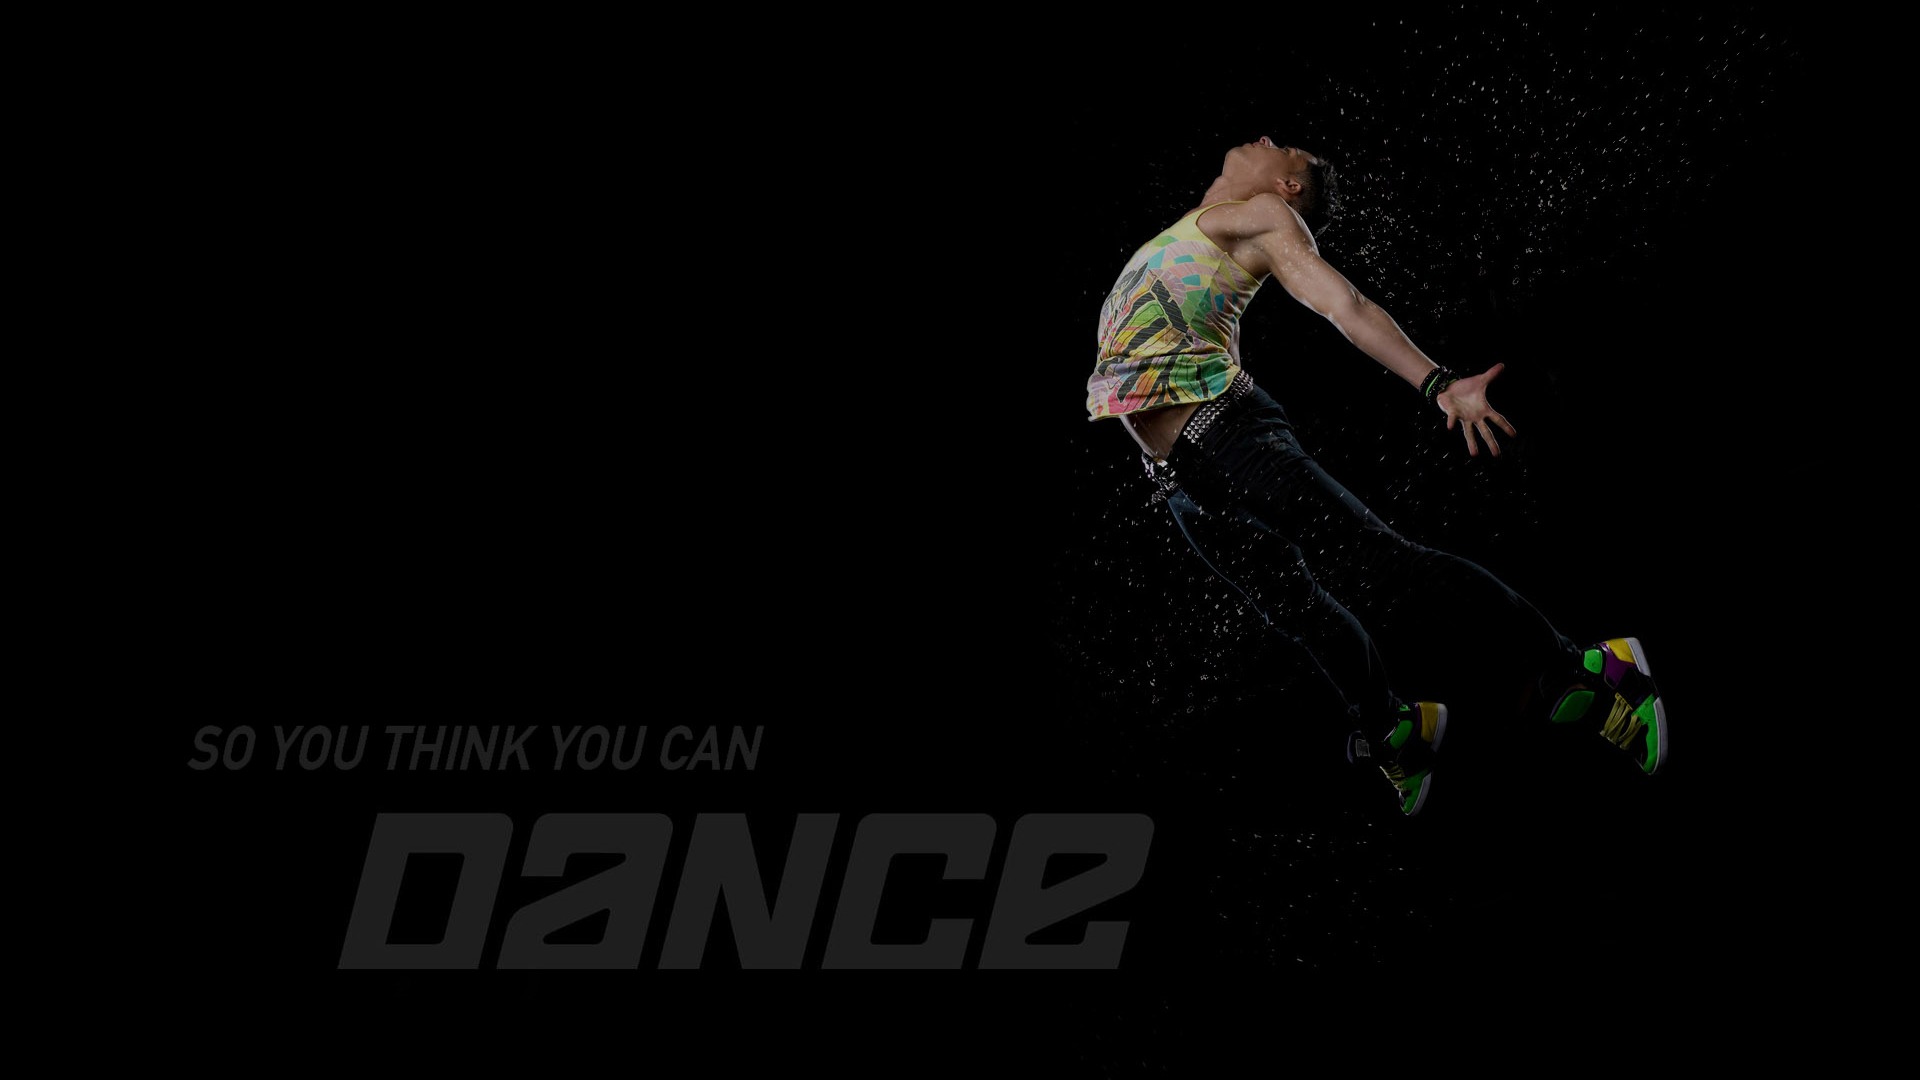 So You Think You Can Dance 舞林爭霸壁紙(二) #6 - 1920x1080